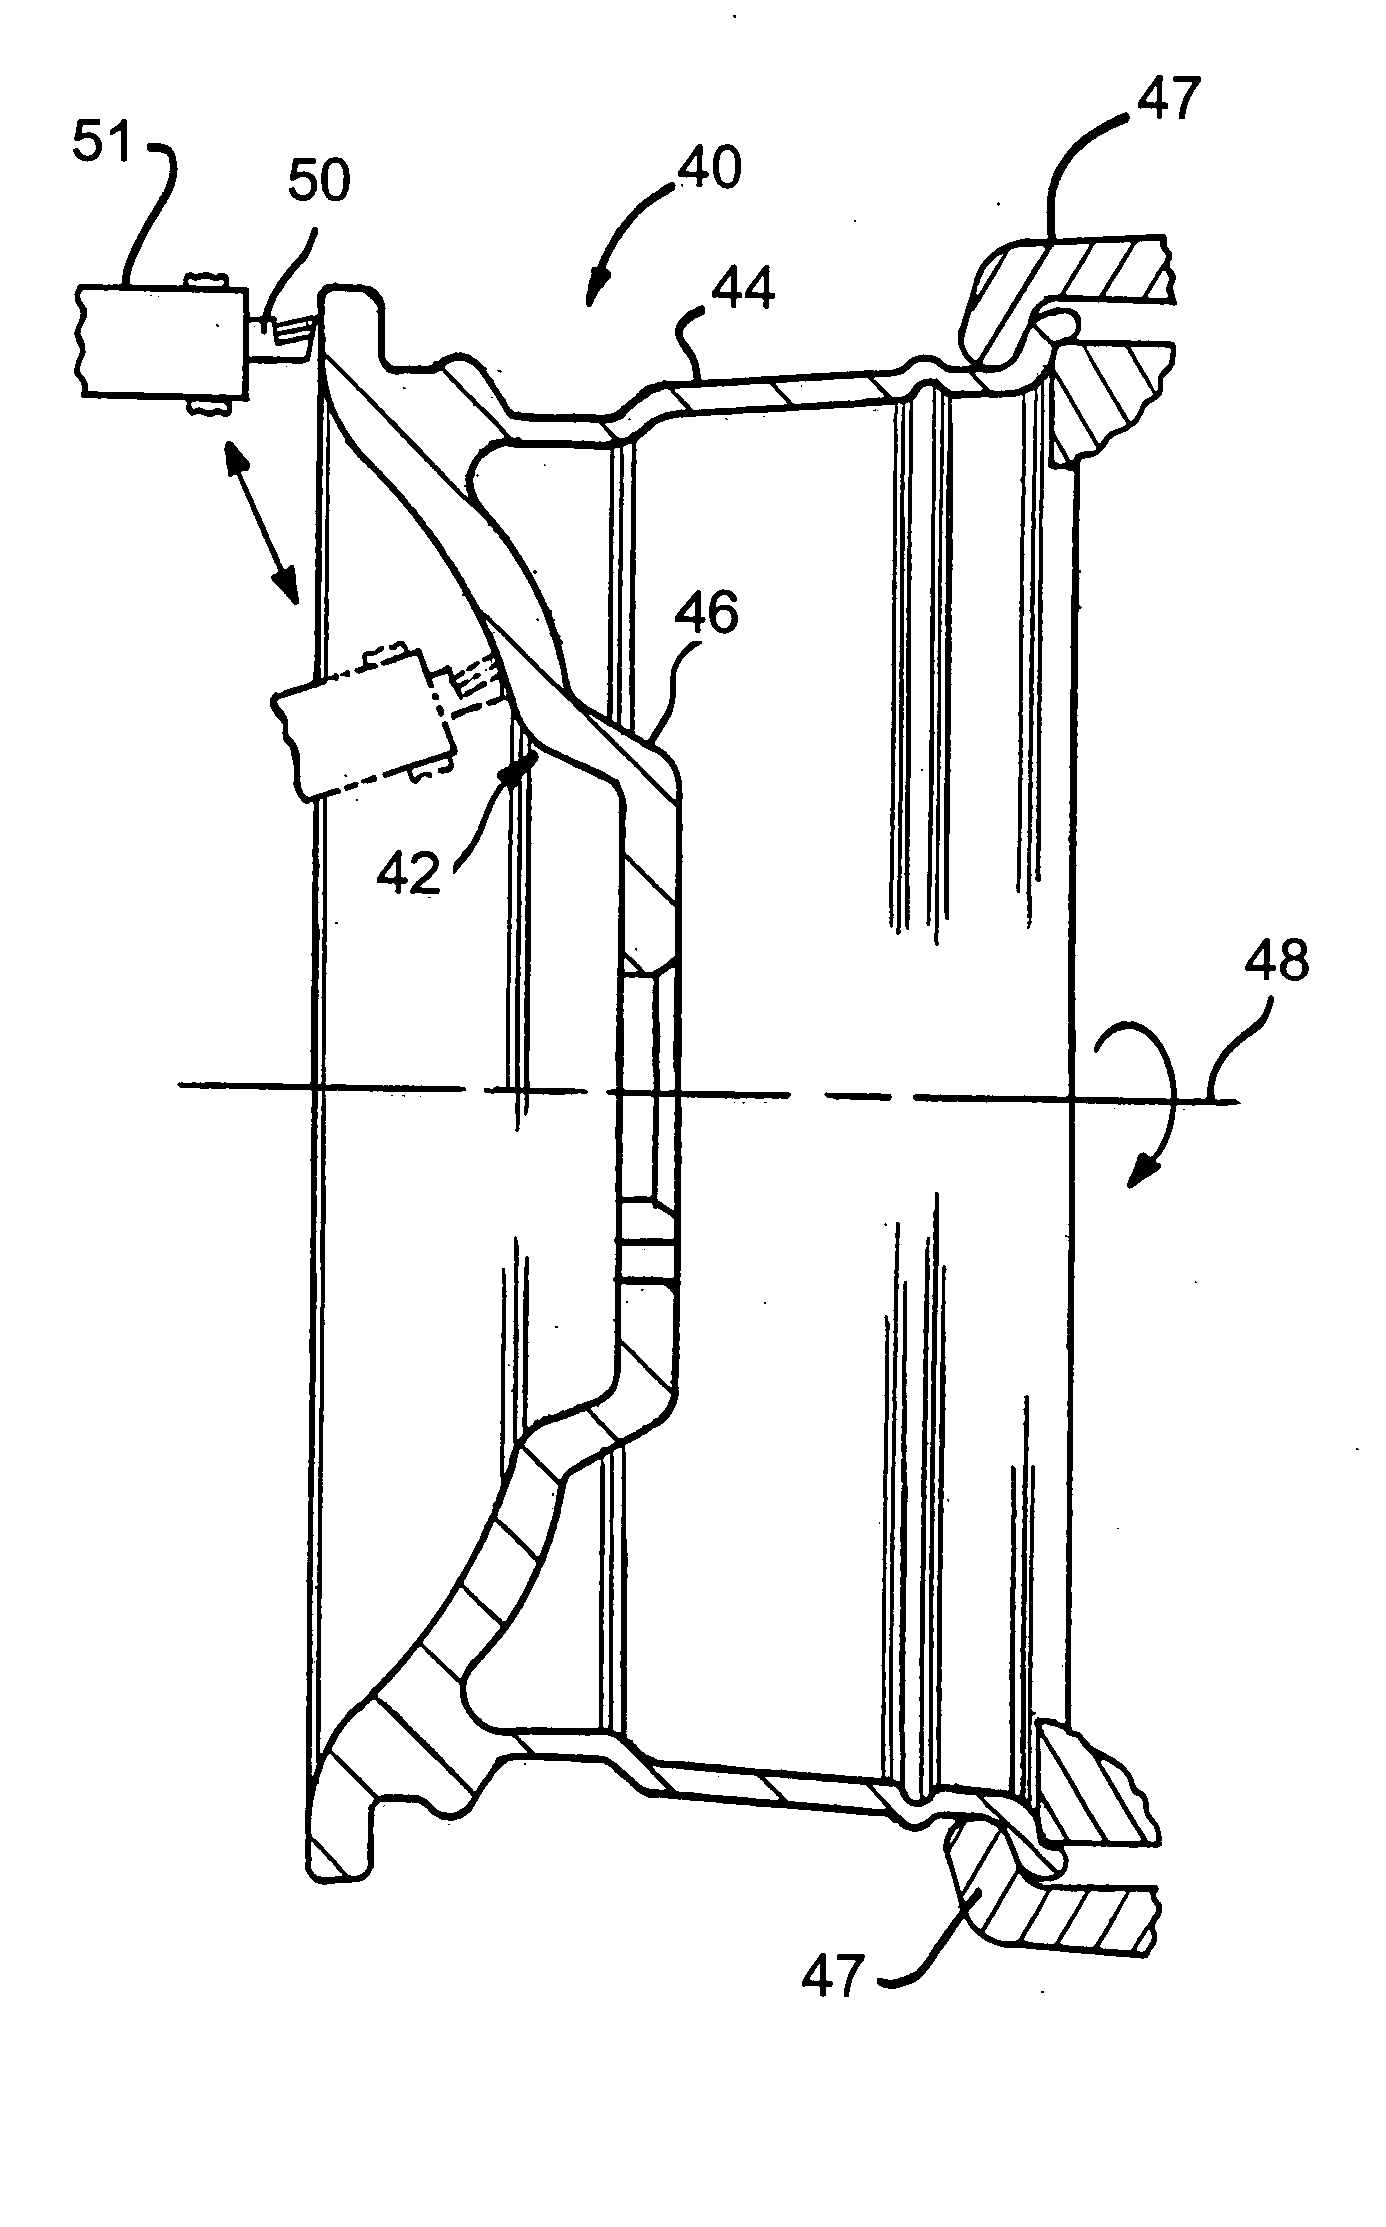 Process for copper free chrome plating of a vehicle wheel surface